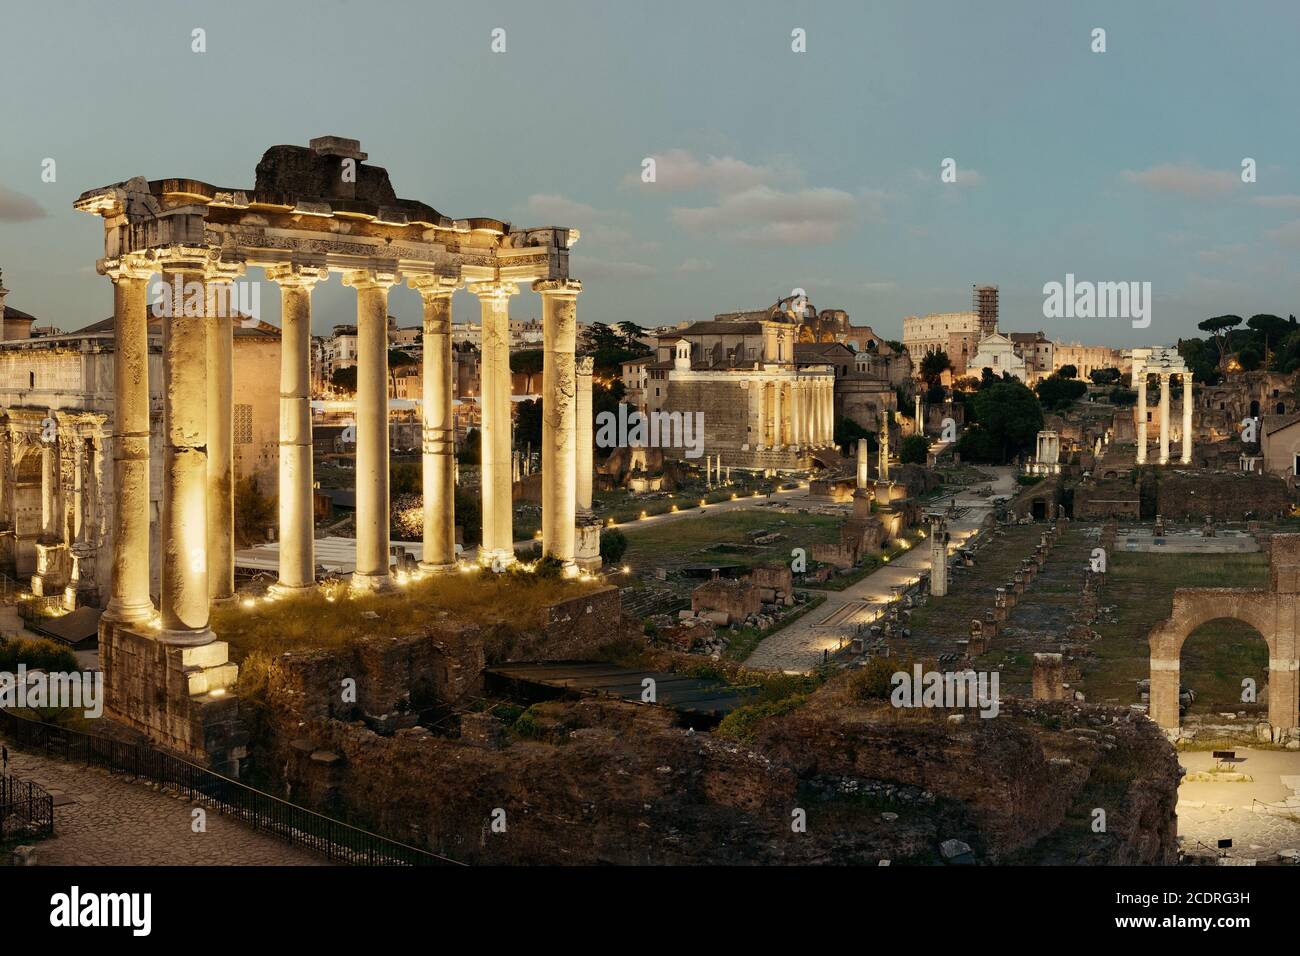 Rome Forum with ruins of ancient architecture at night. Italy. Stock Photo